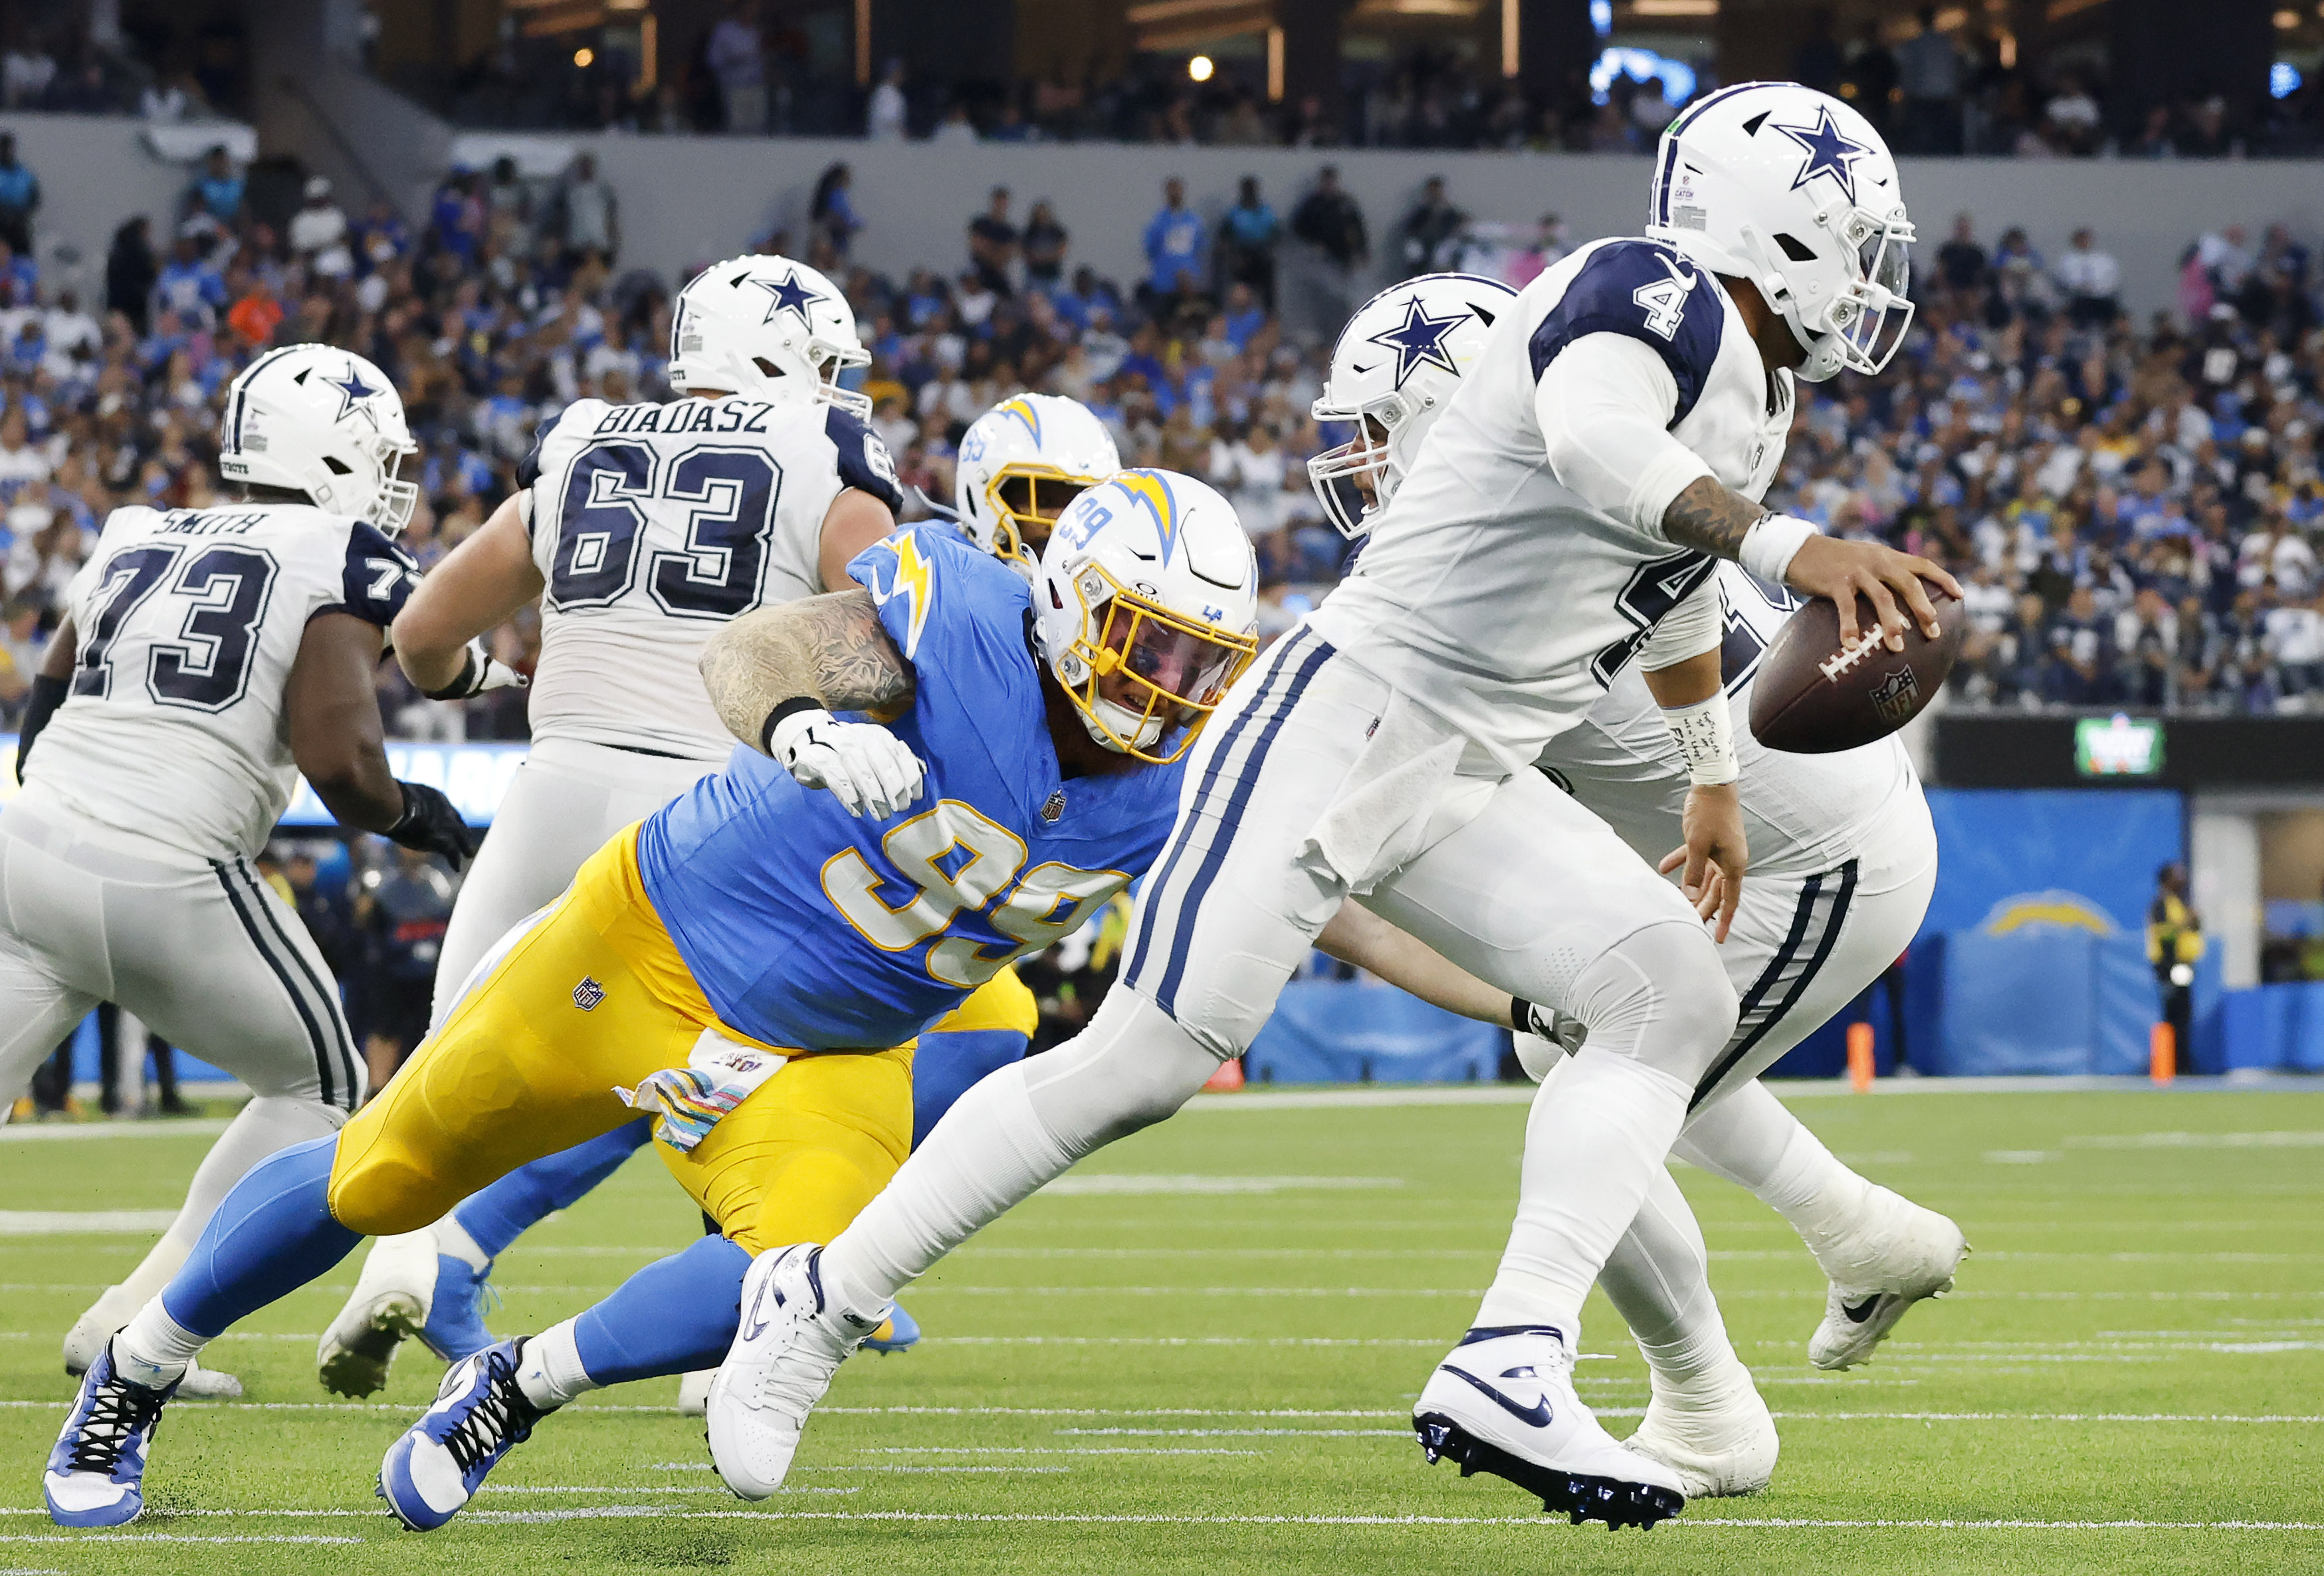 Cowboys-Chargers: How to Watch, Listen, Stream